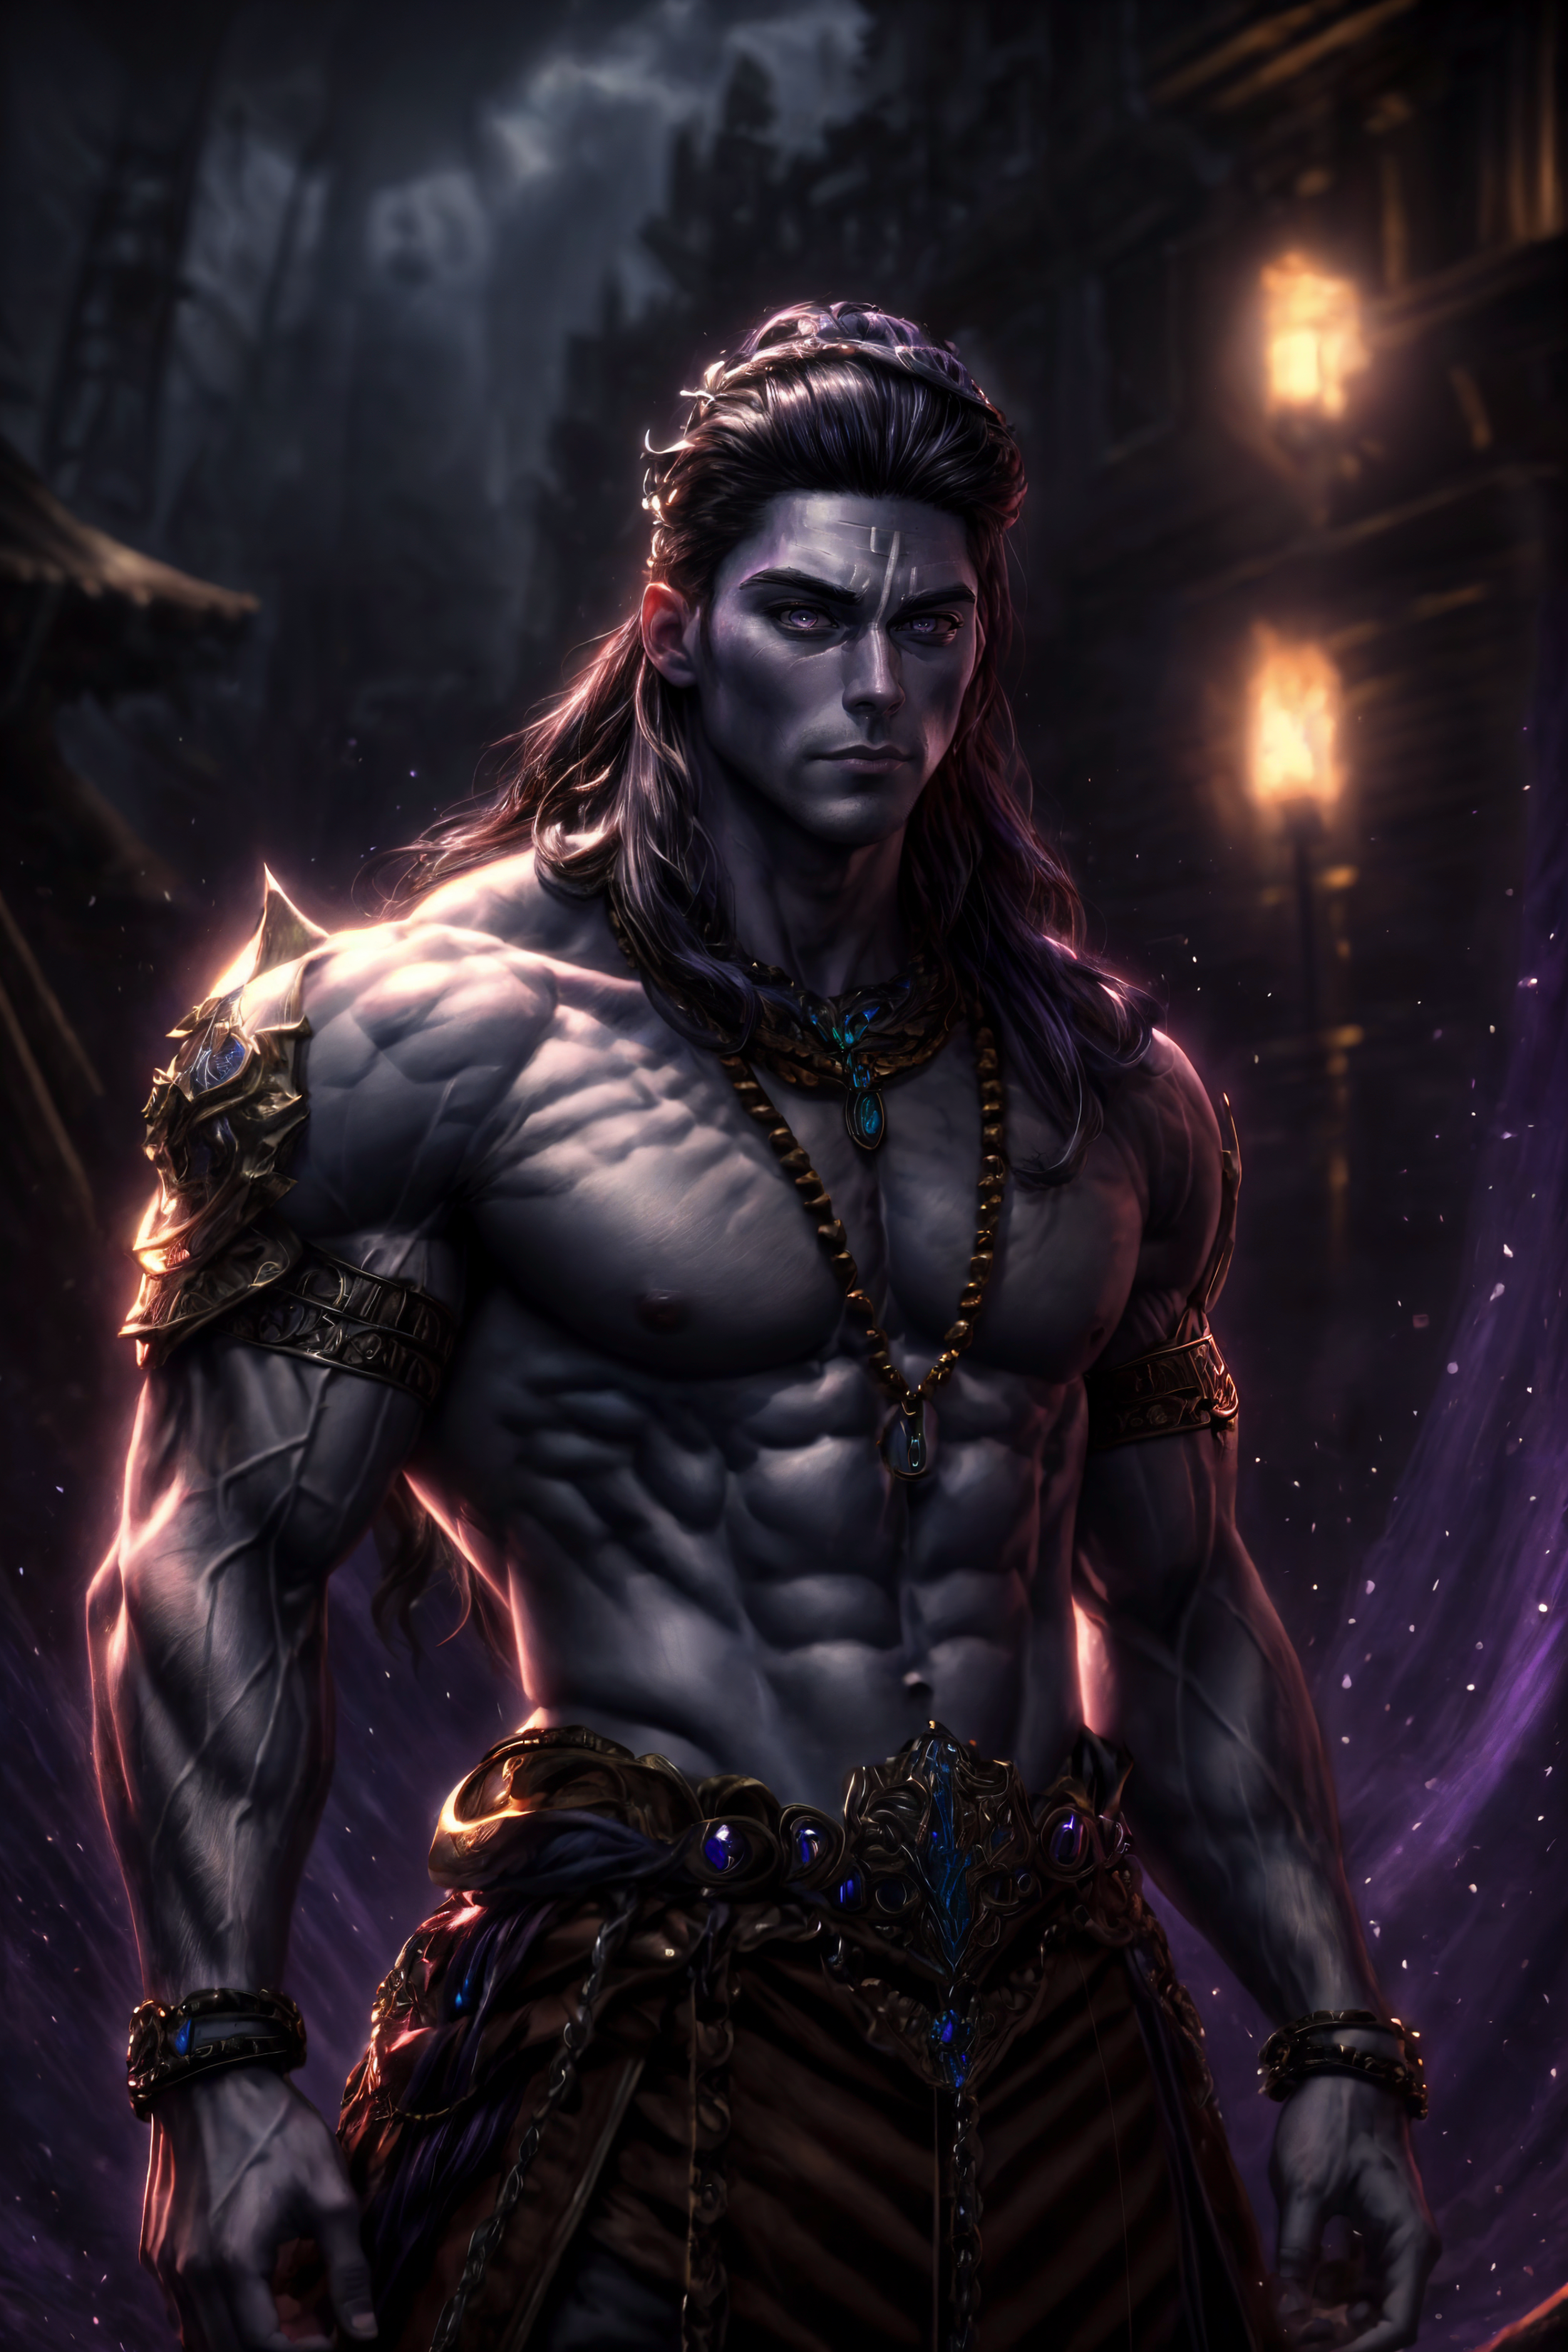 Lord Shiva | reimagined image by isek554